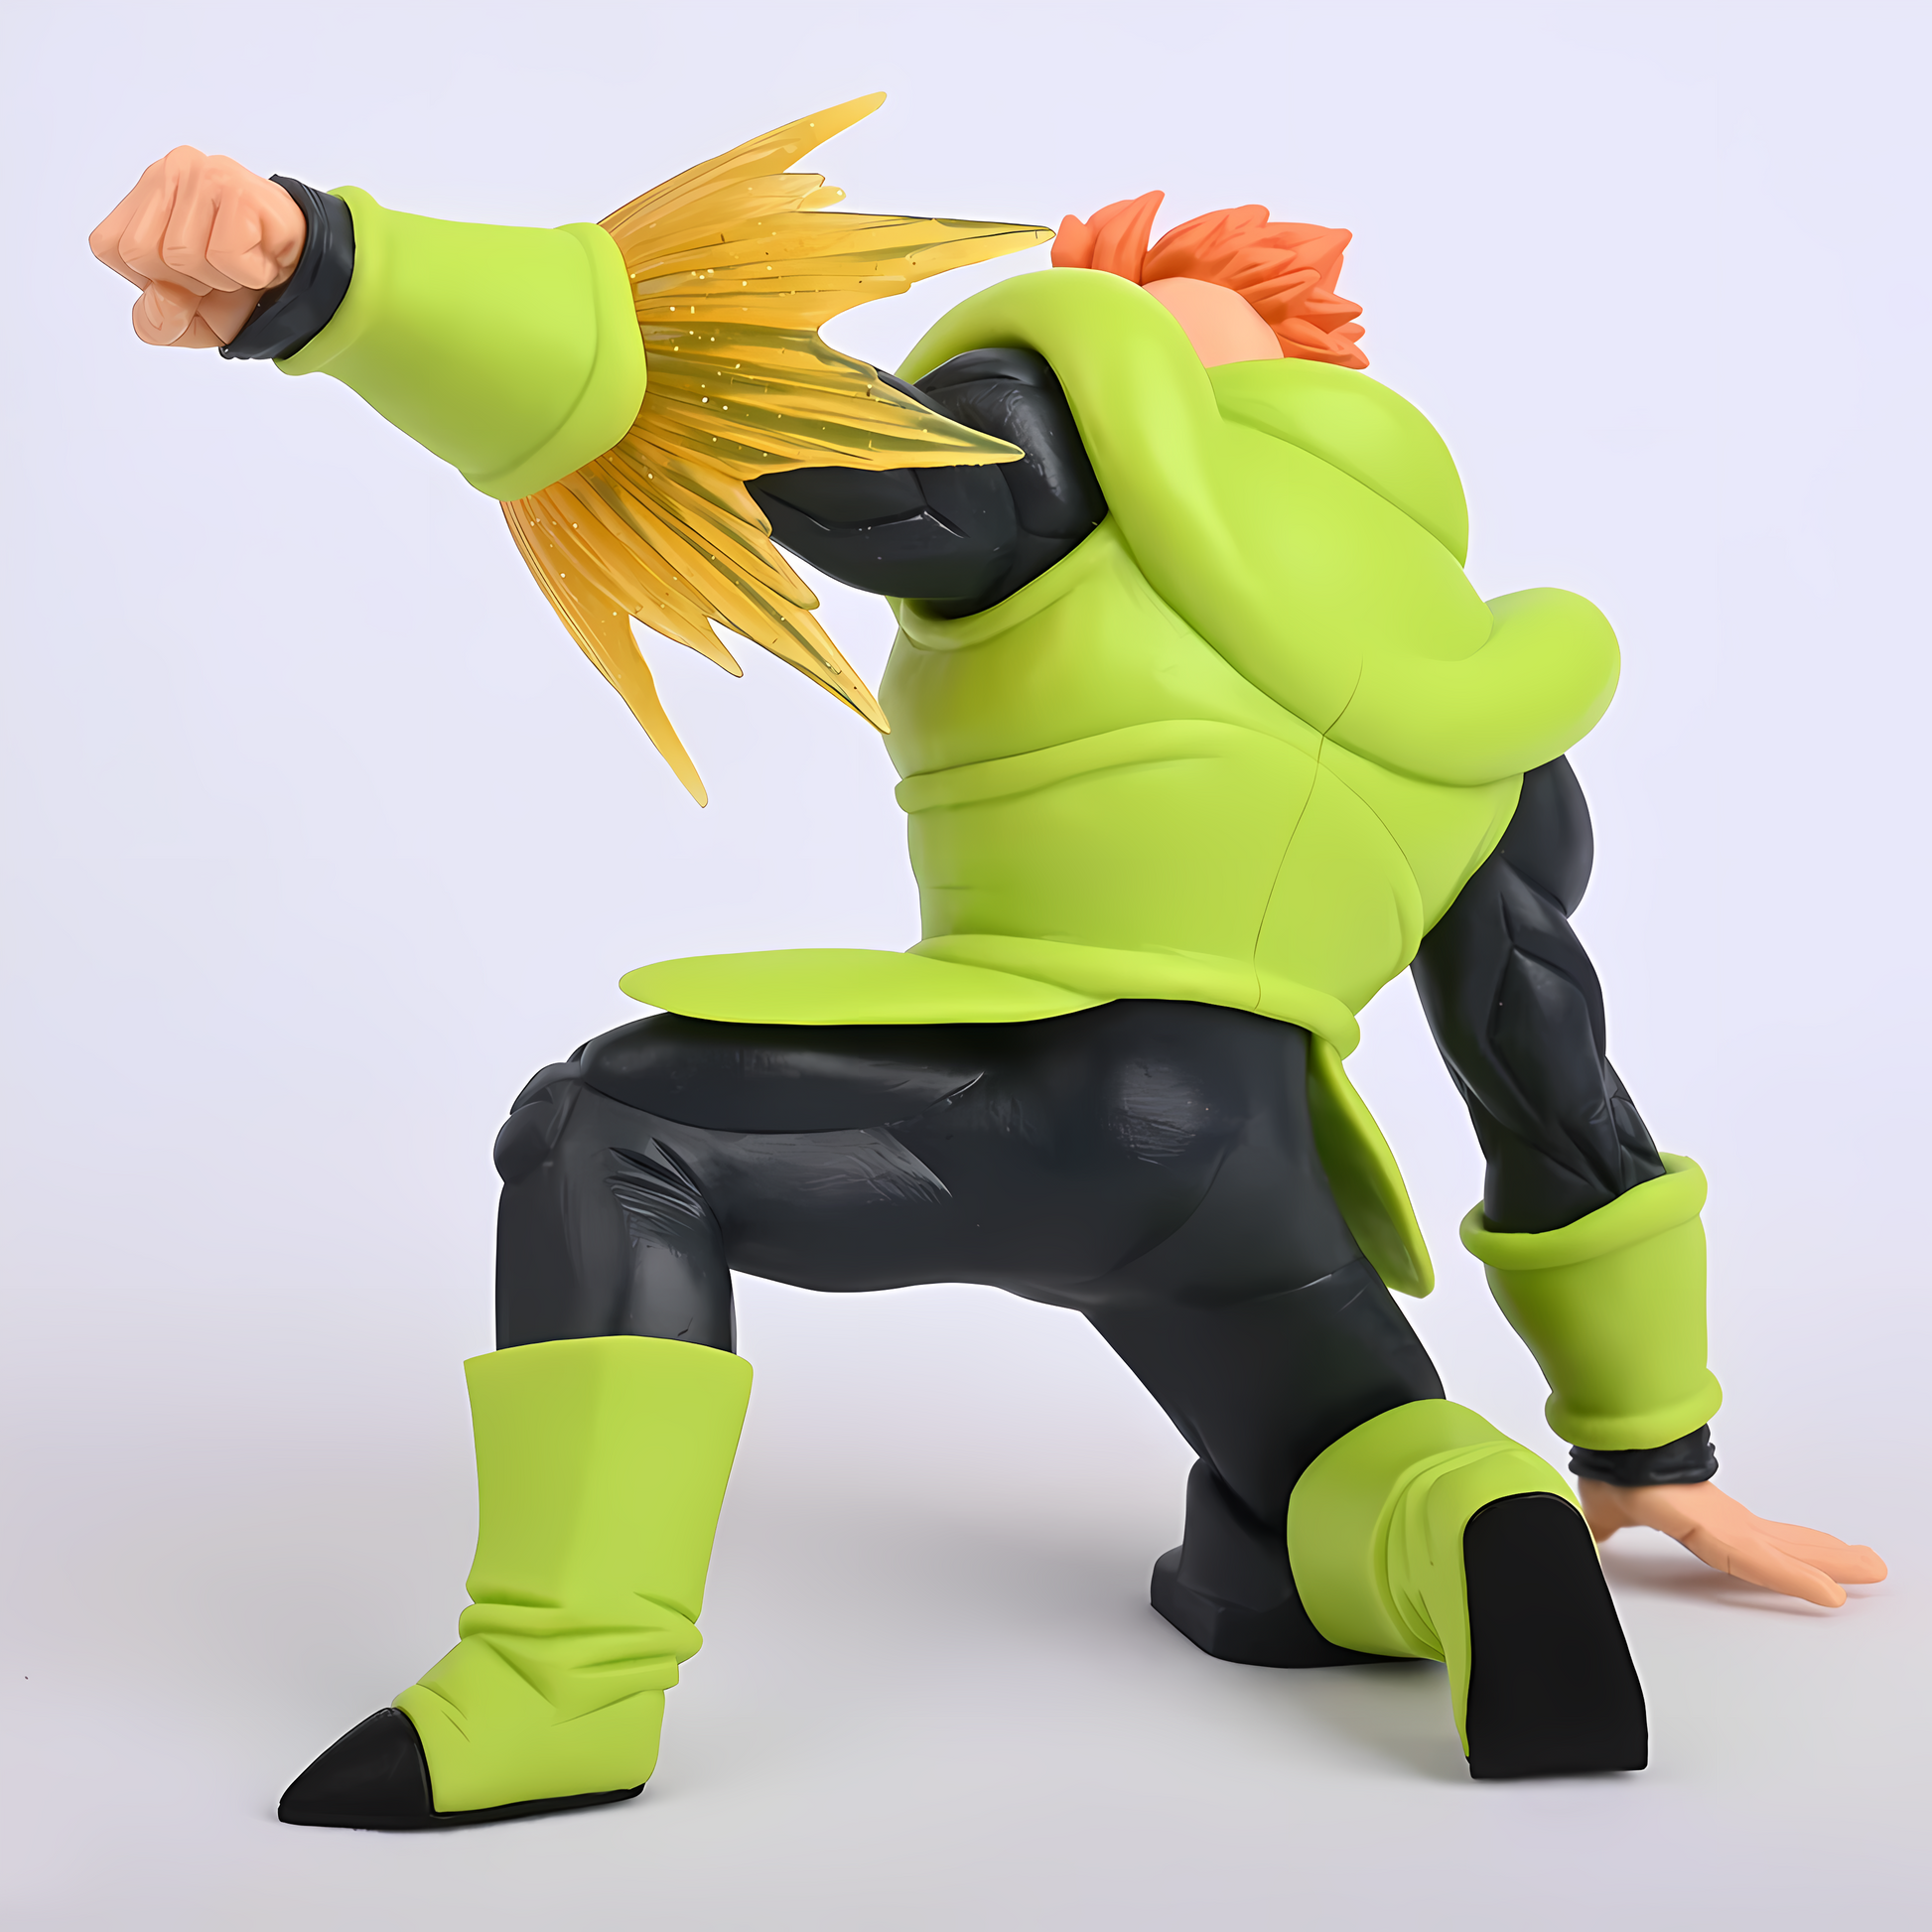 Rear angle of the Android 16 action figure, focusing on the golden energy effect from his arm and the detailed sculpting of his green jacket and dark pants.